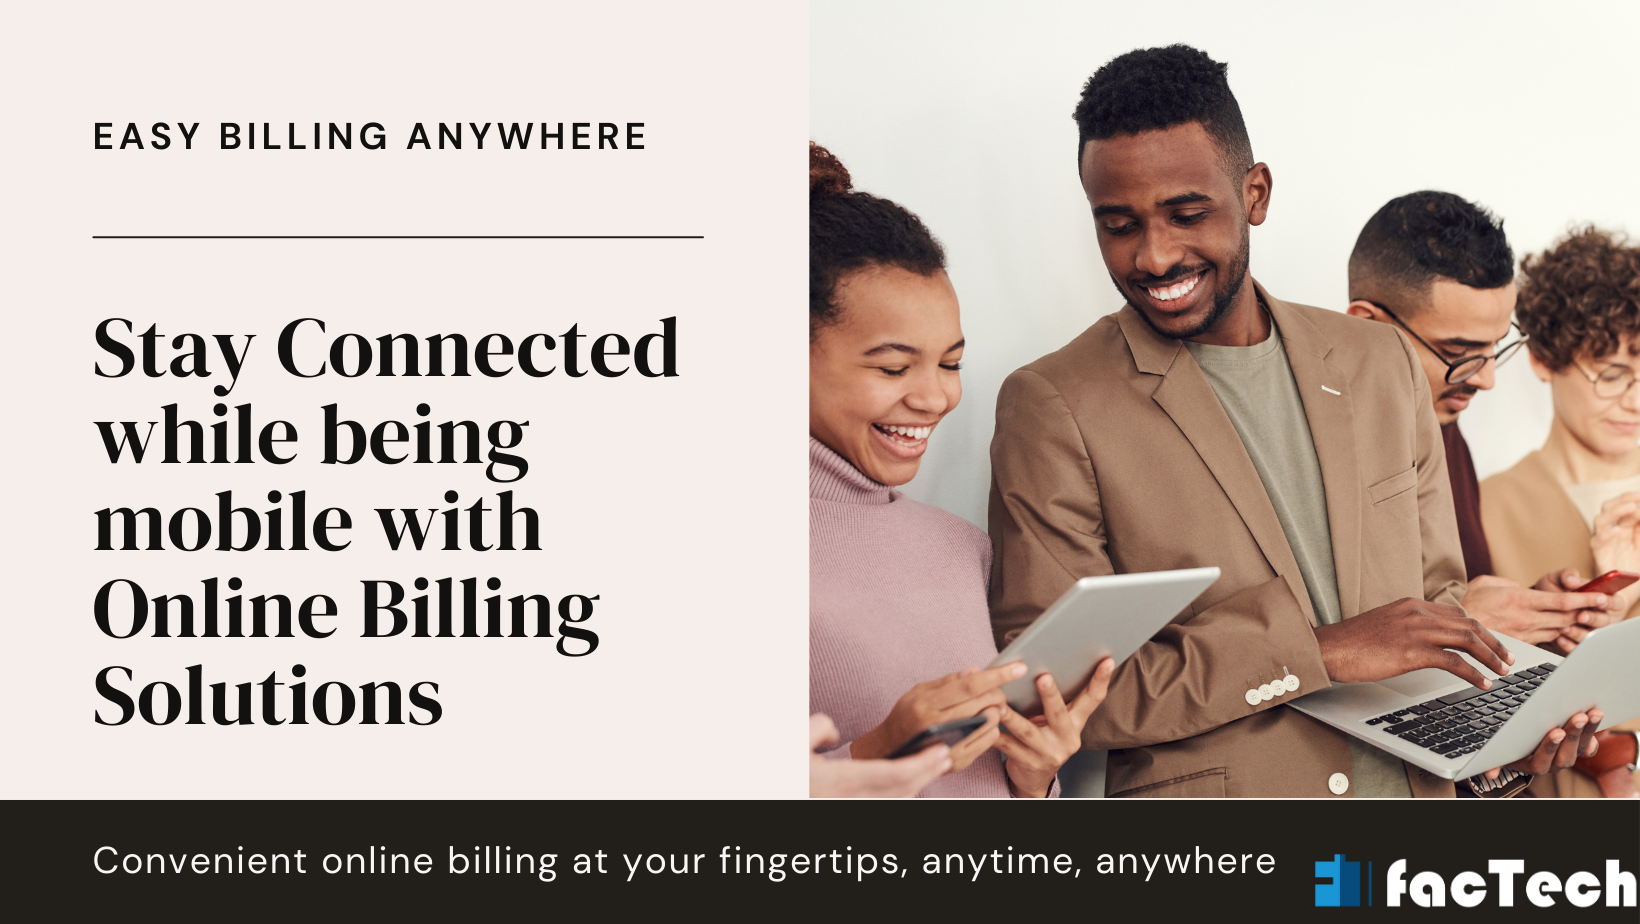 Stay Connected while being mobile with Online Billing Solutions